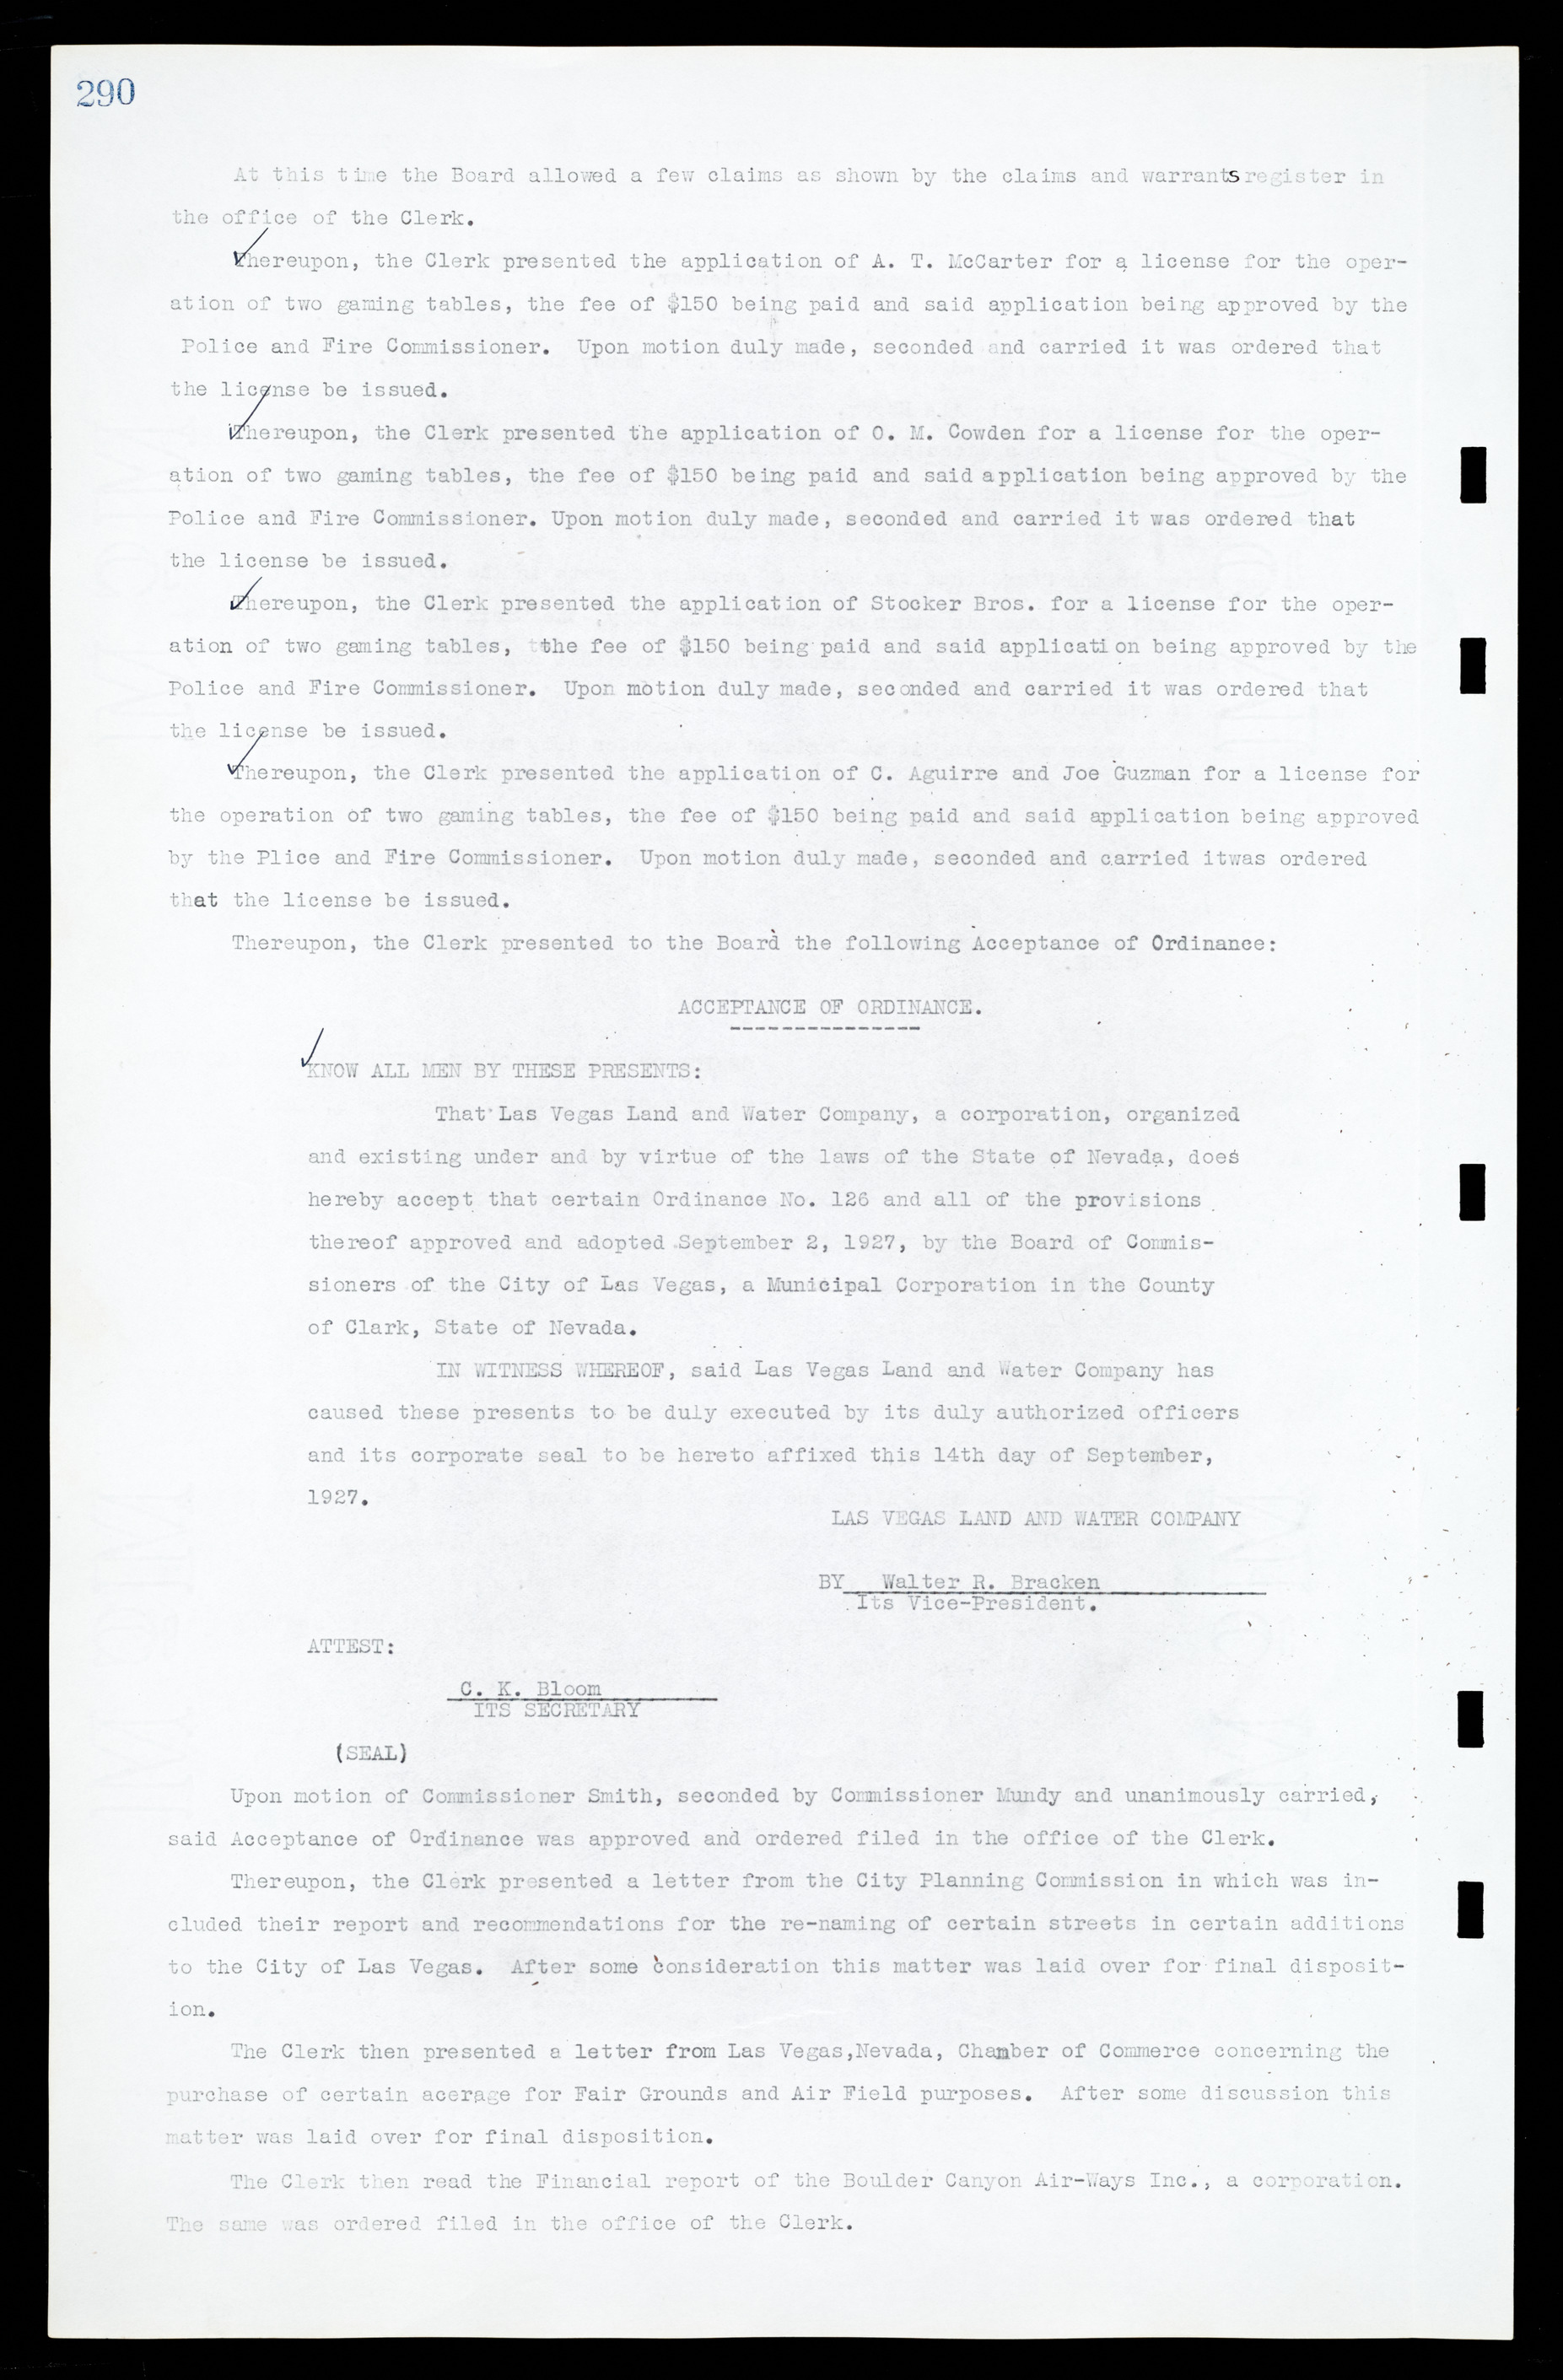 Las Vegas City Commission Minutes, March 1, 1922 to May 10, 1929, lvc000002-299